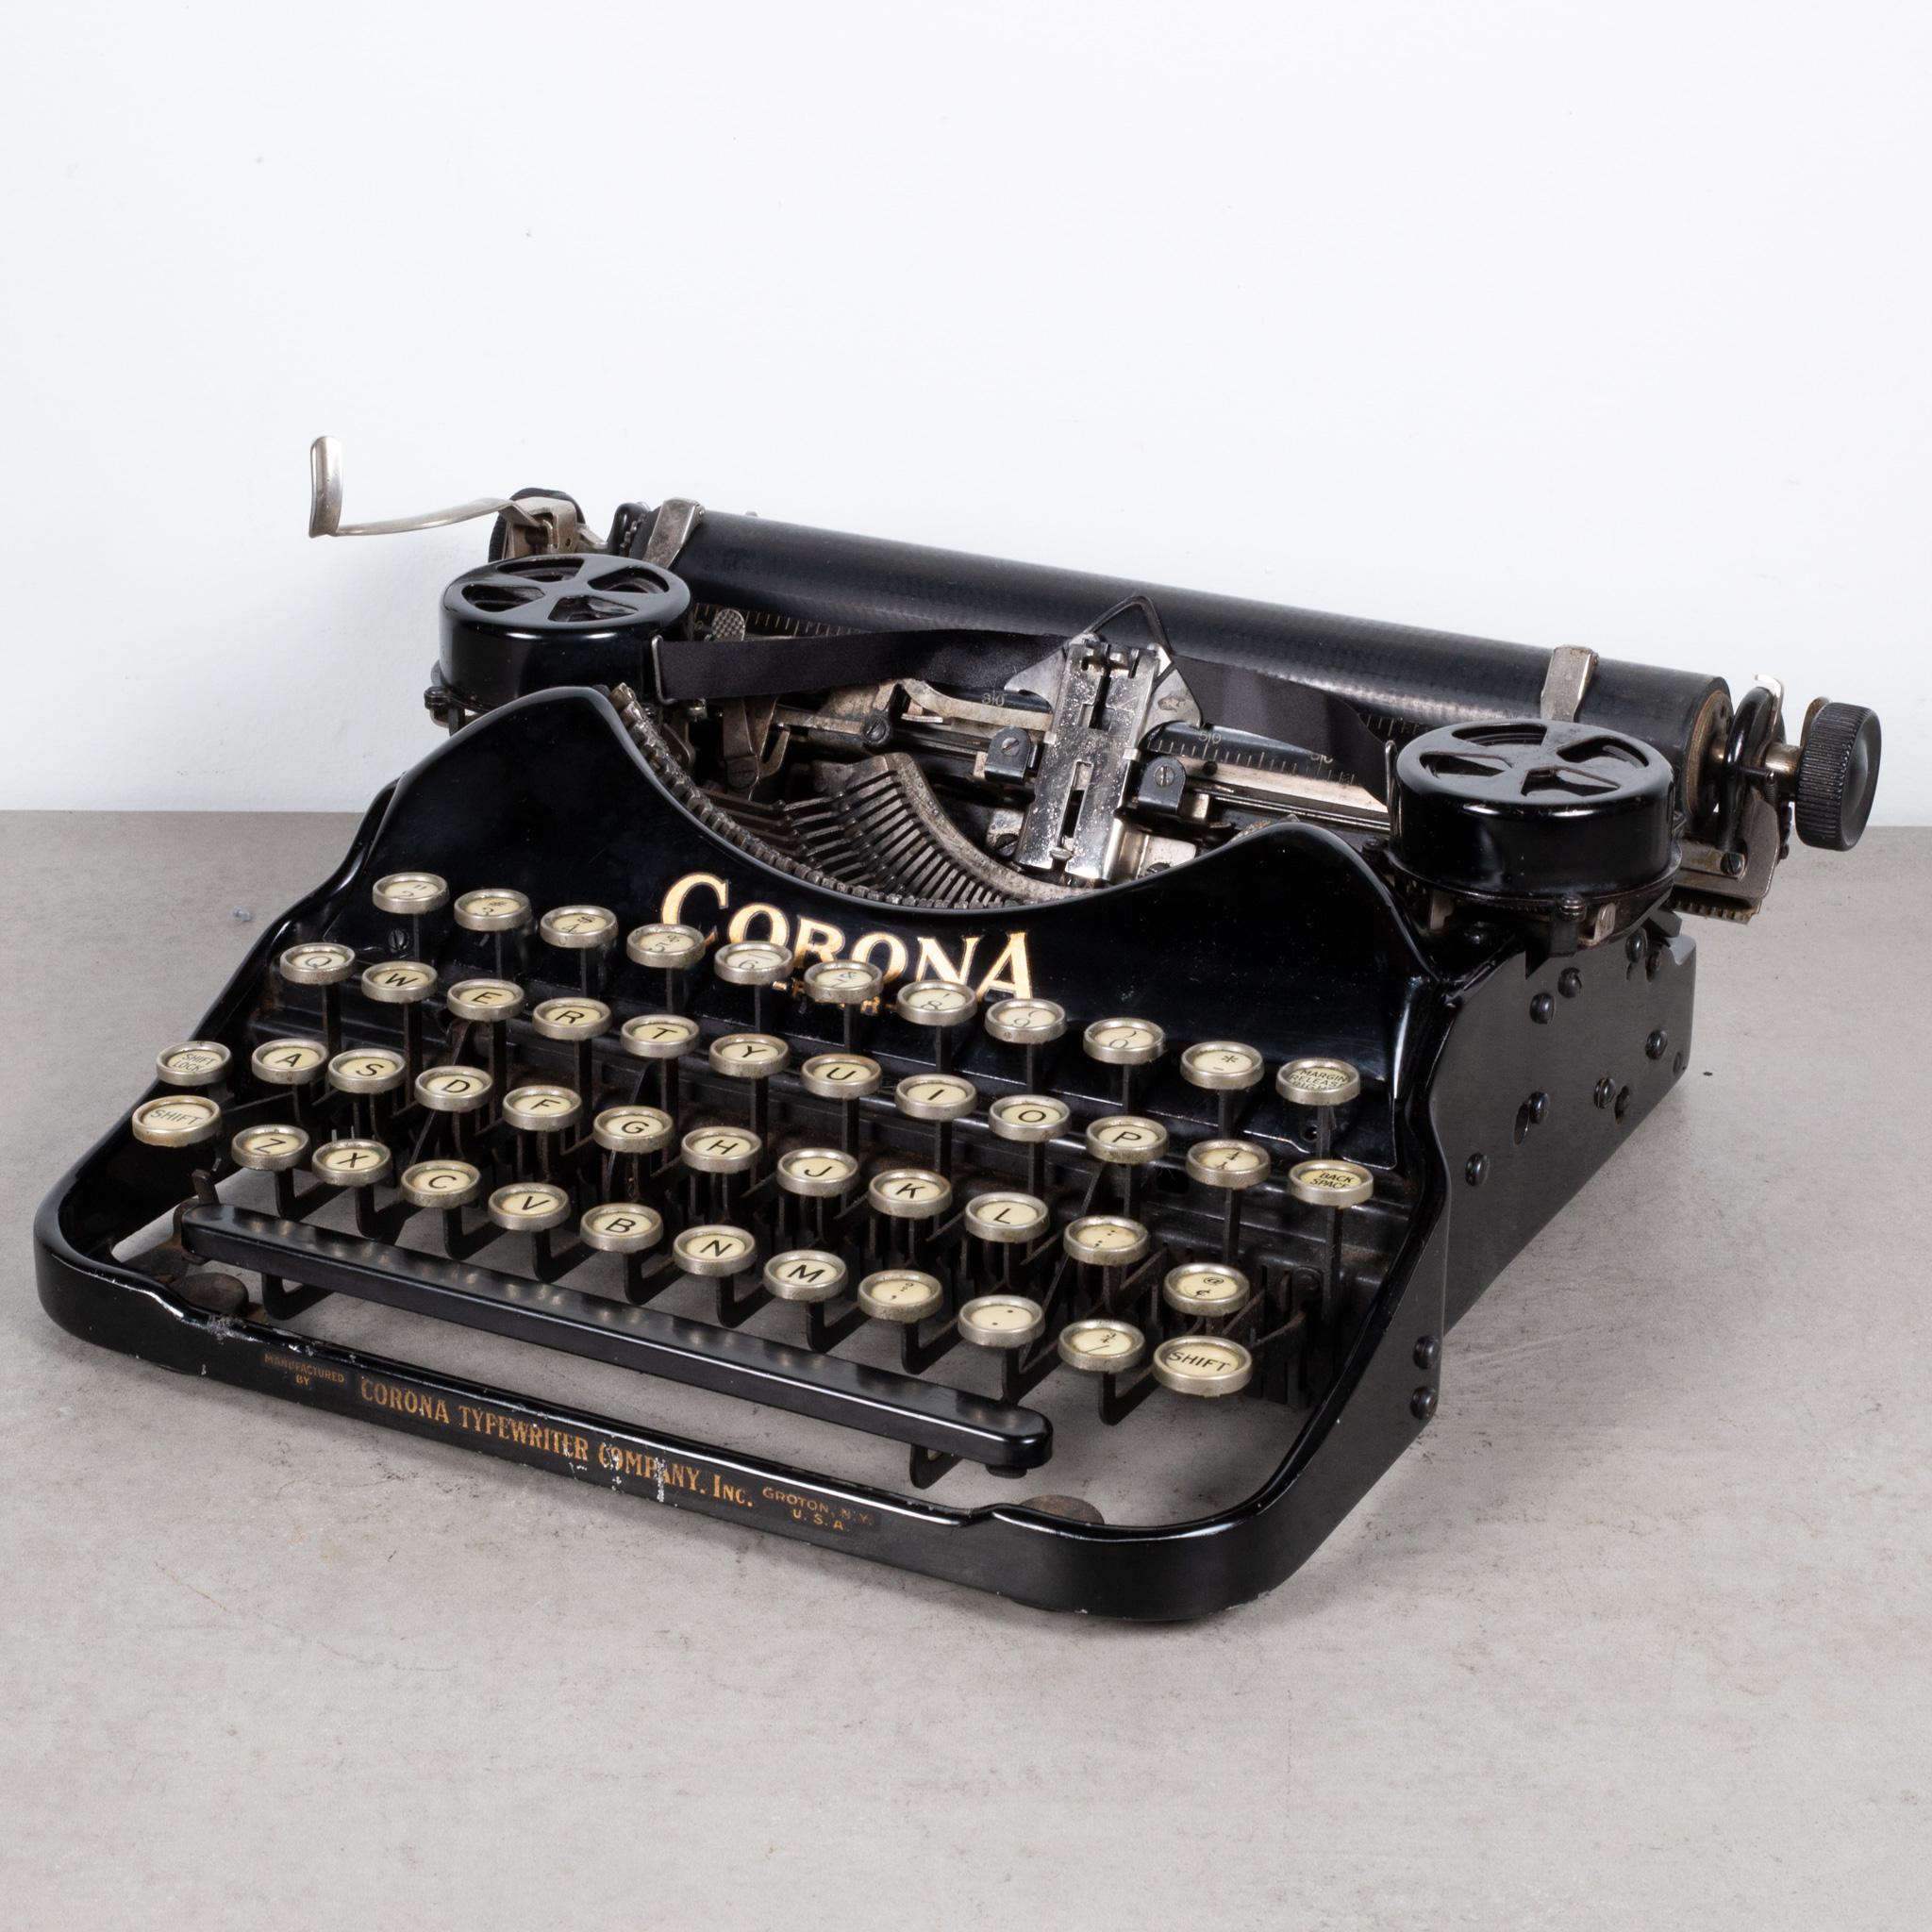 ABOUT

An Art Deco portable Corona Four bank typewriter in high gloss black and original gold lettering. The keys are nickle with pale yellow porcelain interior and black letters covered in glass. This typewriter has smooth typing, new ribbon and